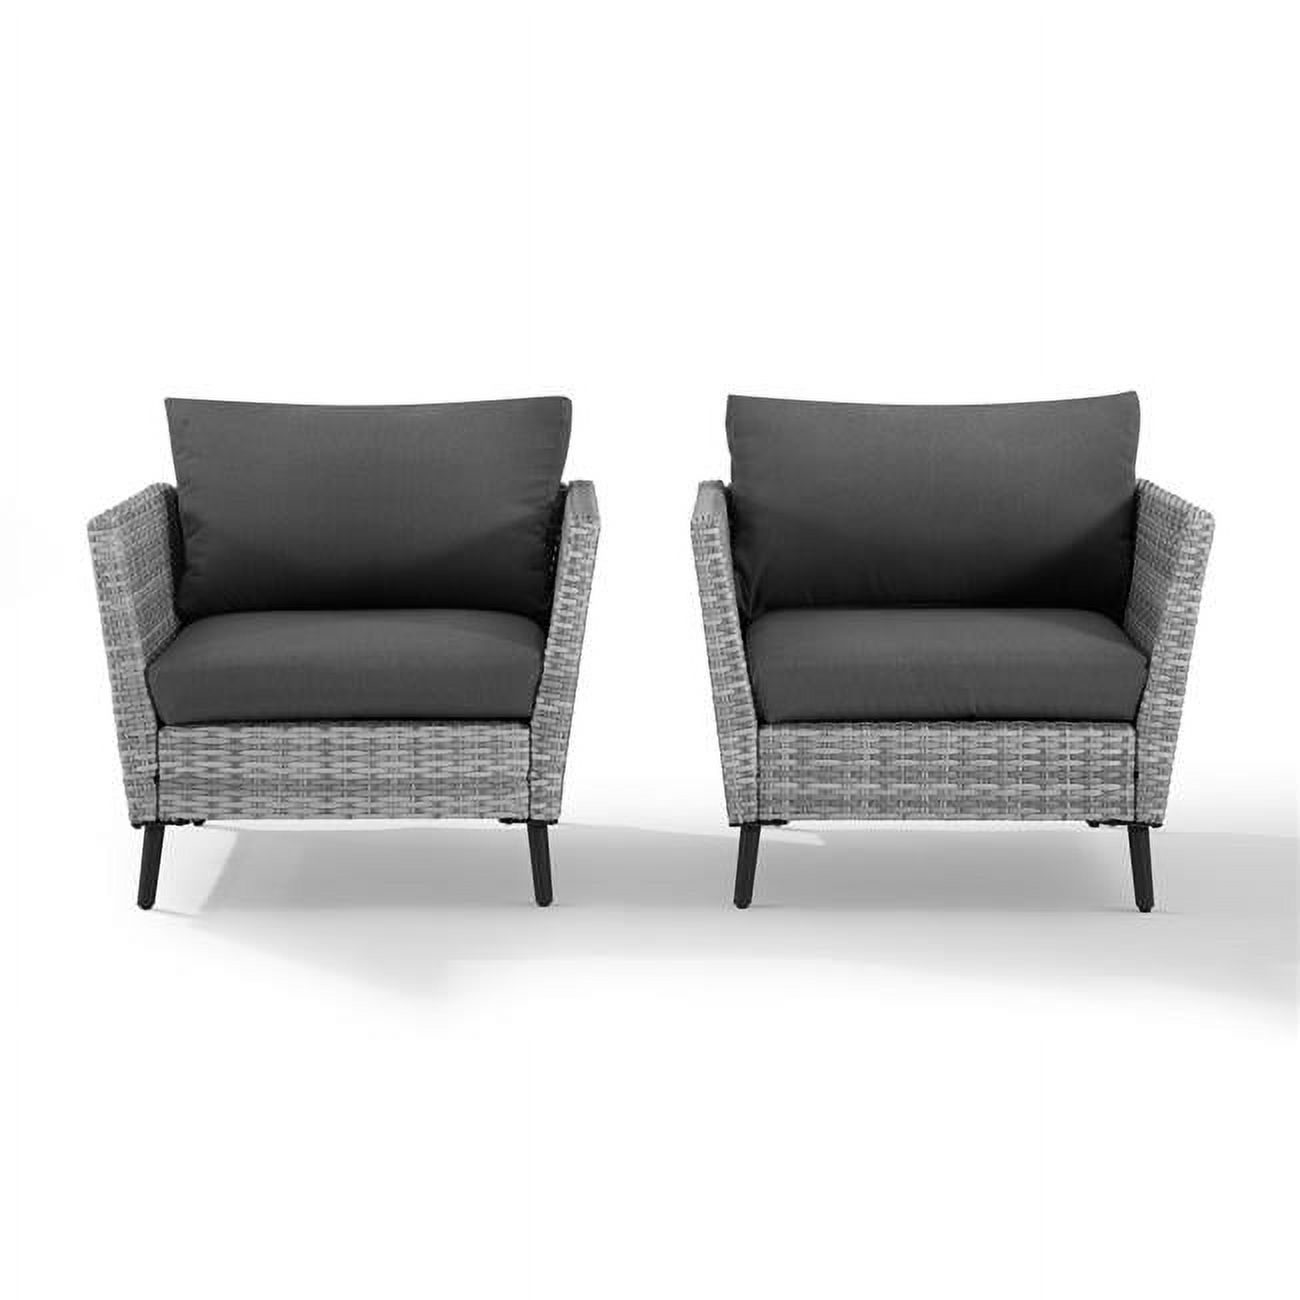 Crosley Richland Wicker Patio Arm Chair in Gray (Set of 2) - image 1 of 10